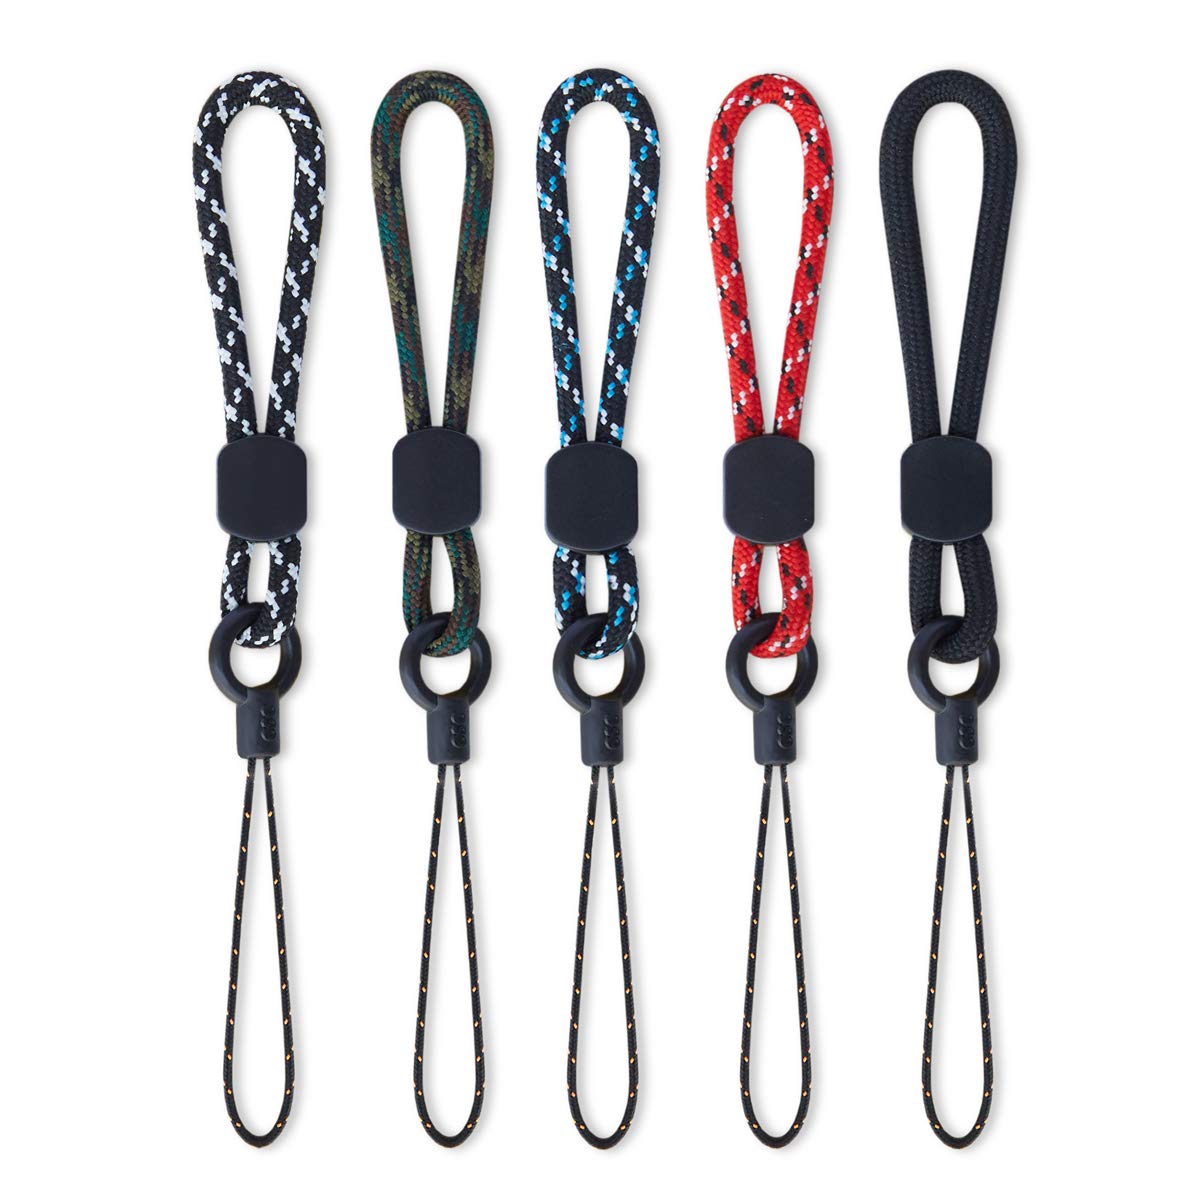 Youowo Lanyard Finger Strap 5 Pack Ring Lanyard Rope Small Lanyards For Phone Cases Keys Lanyard Short Keychain For Usb Id Card 